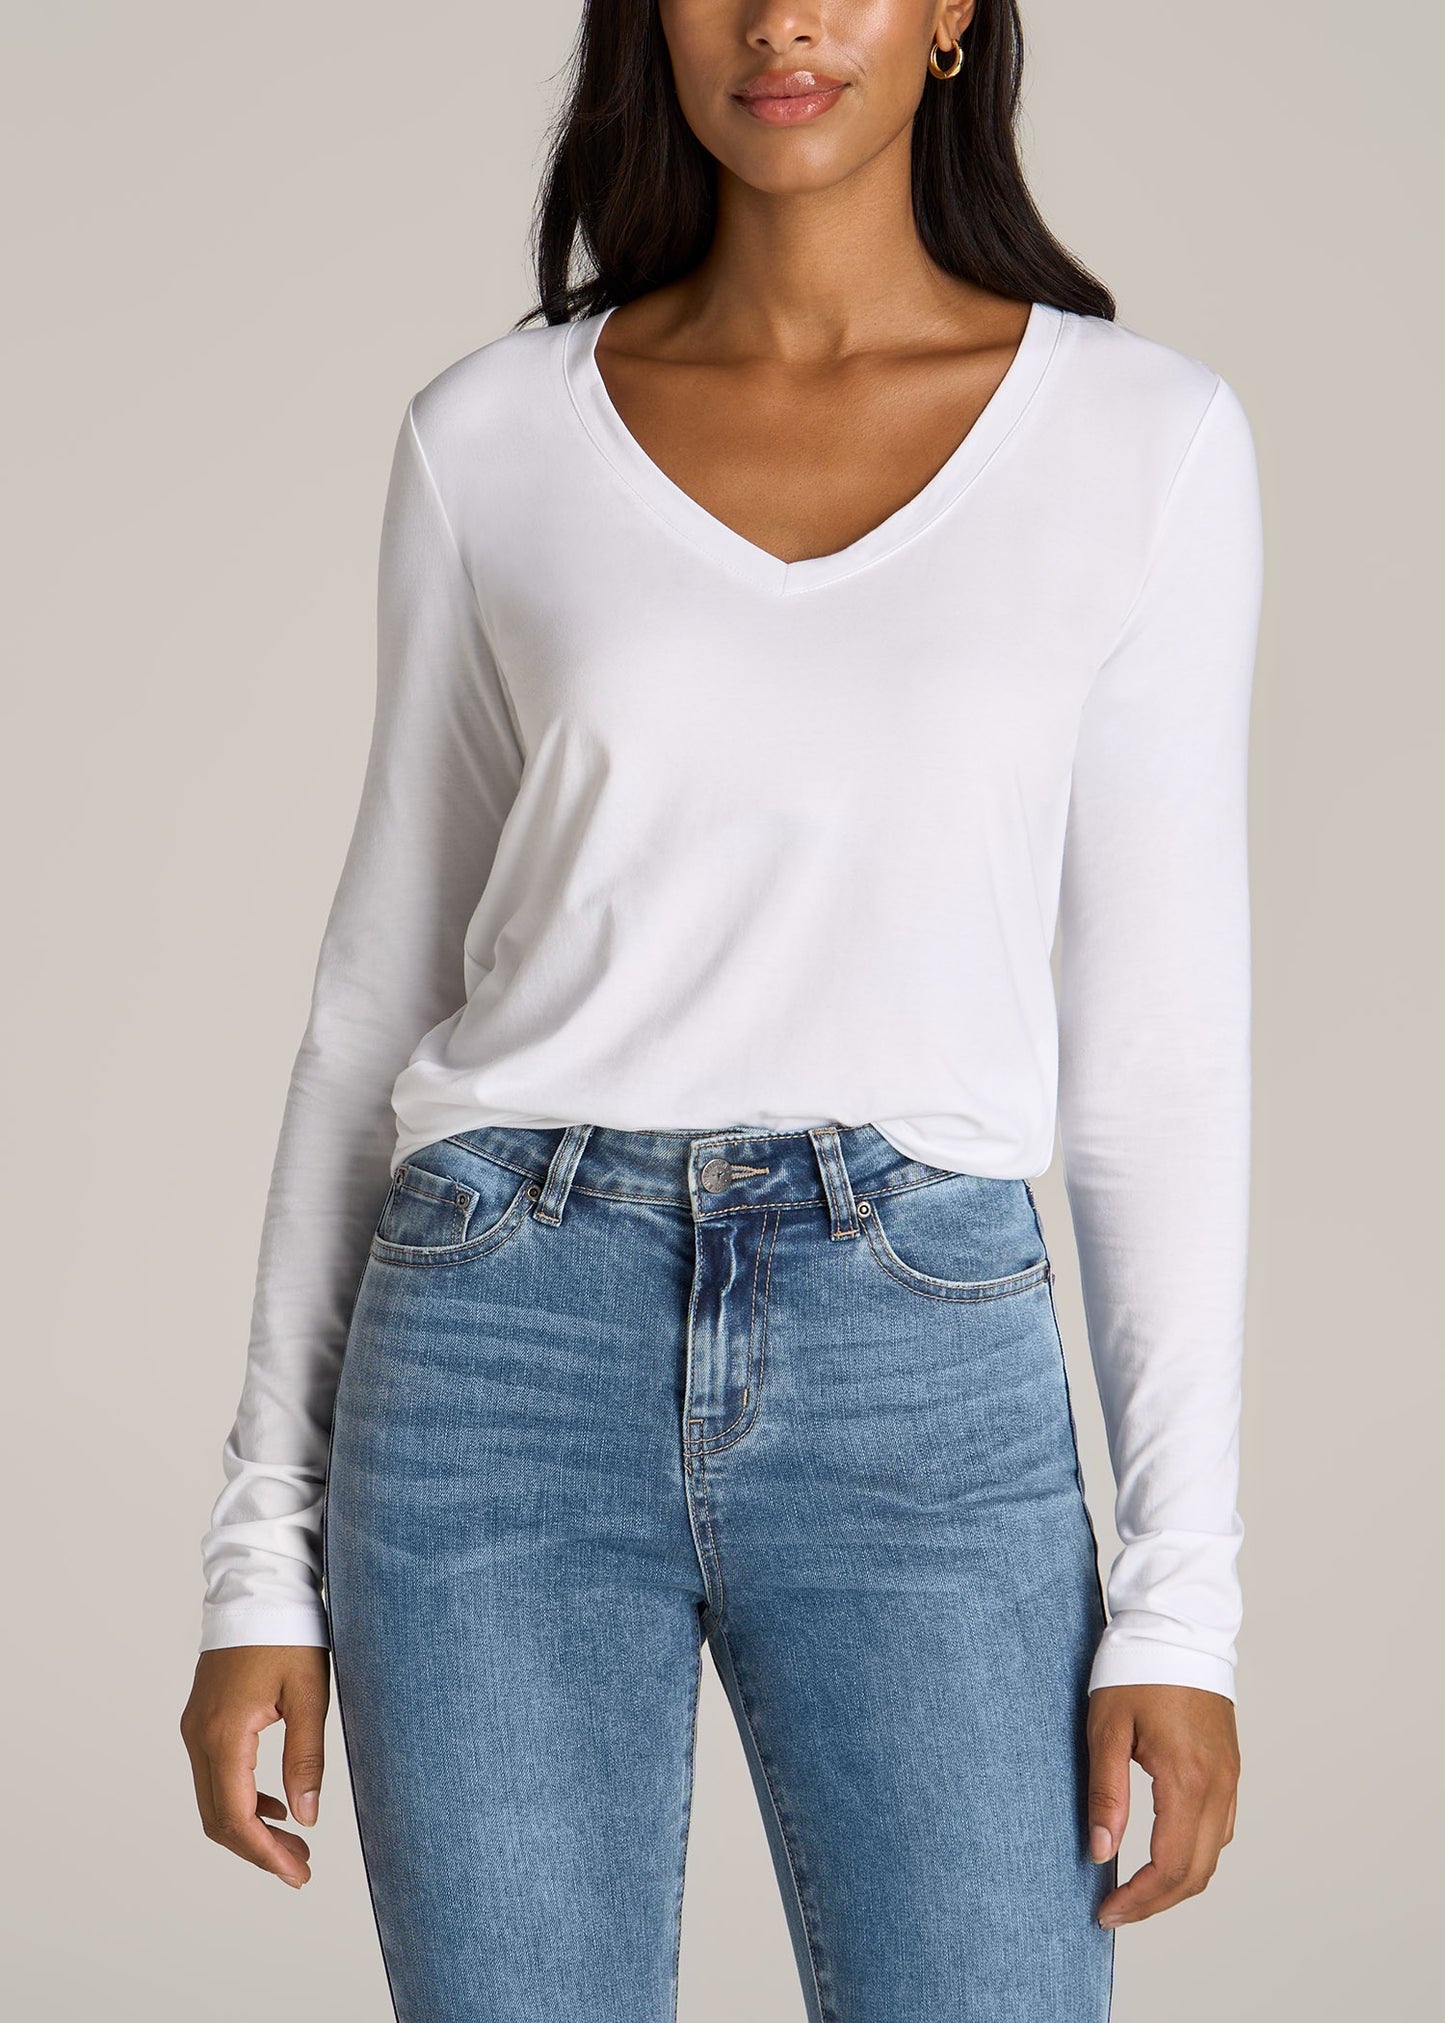 American-Tall-Women-Long-sleeve-scoop-v-neck-tee-white-front